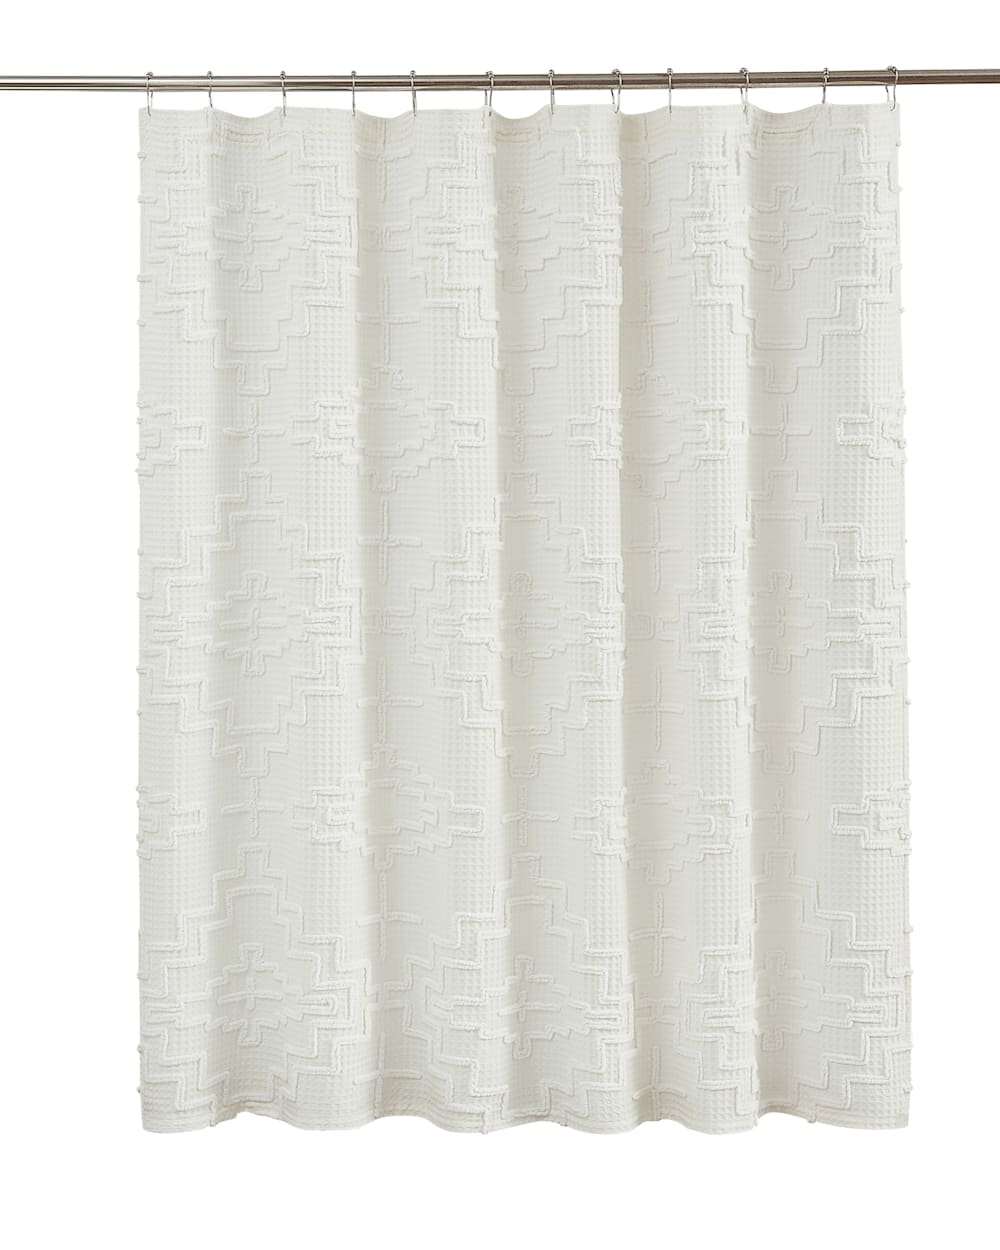 ALTERNATE VIEW OF KIVA STEPS SHOWER CURTAIN IN IVORY image number 3